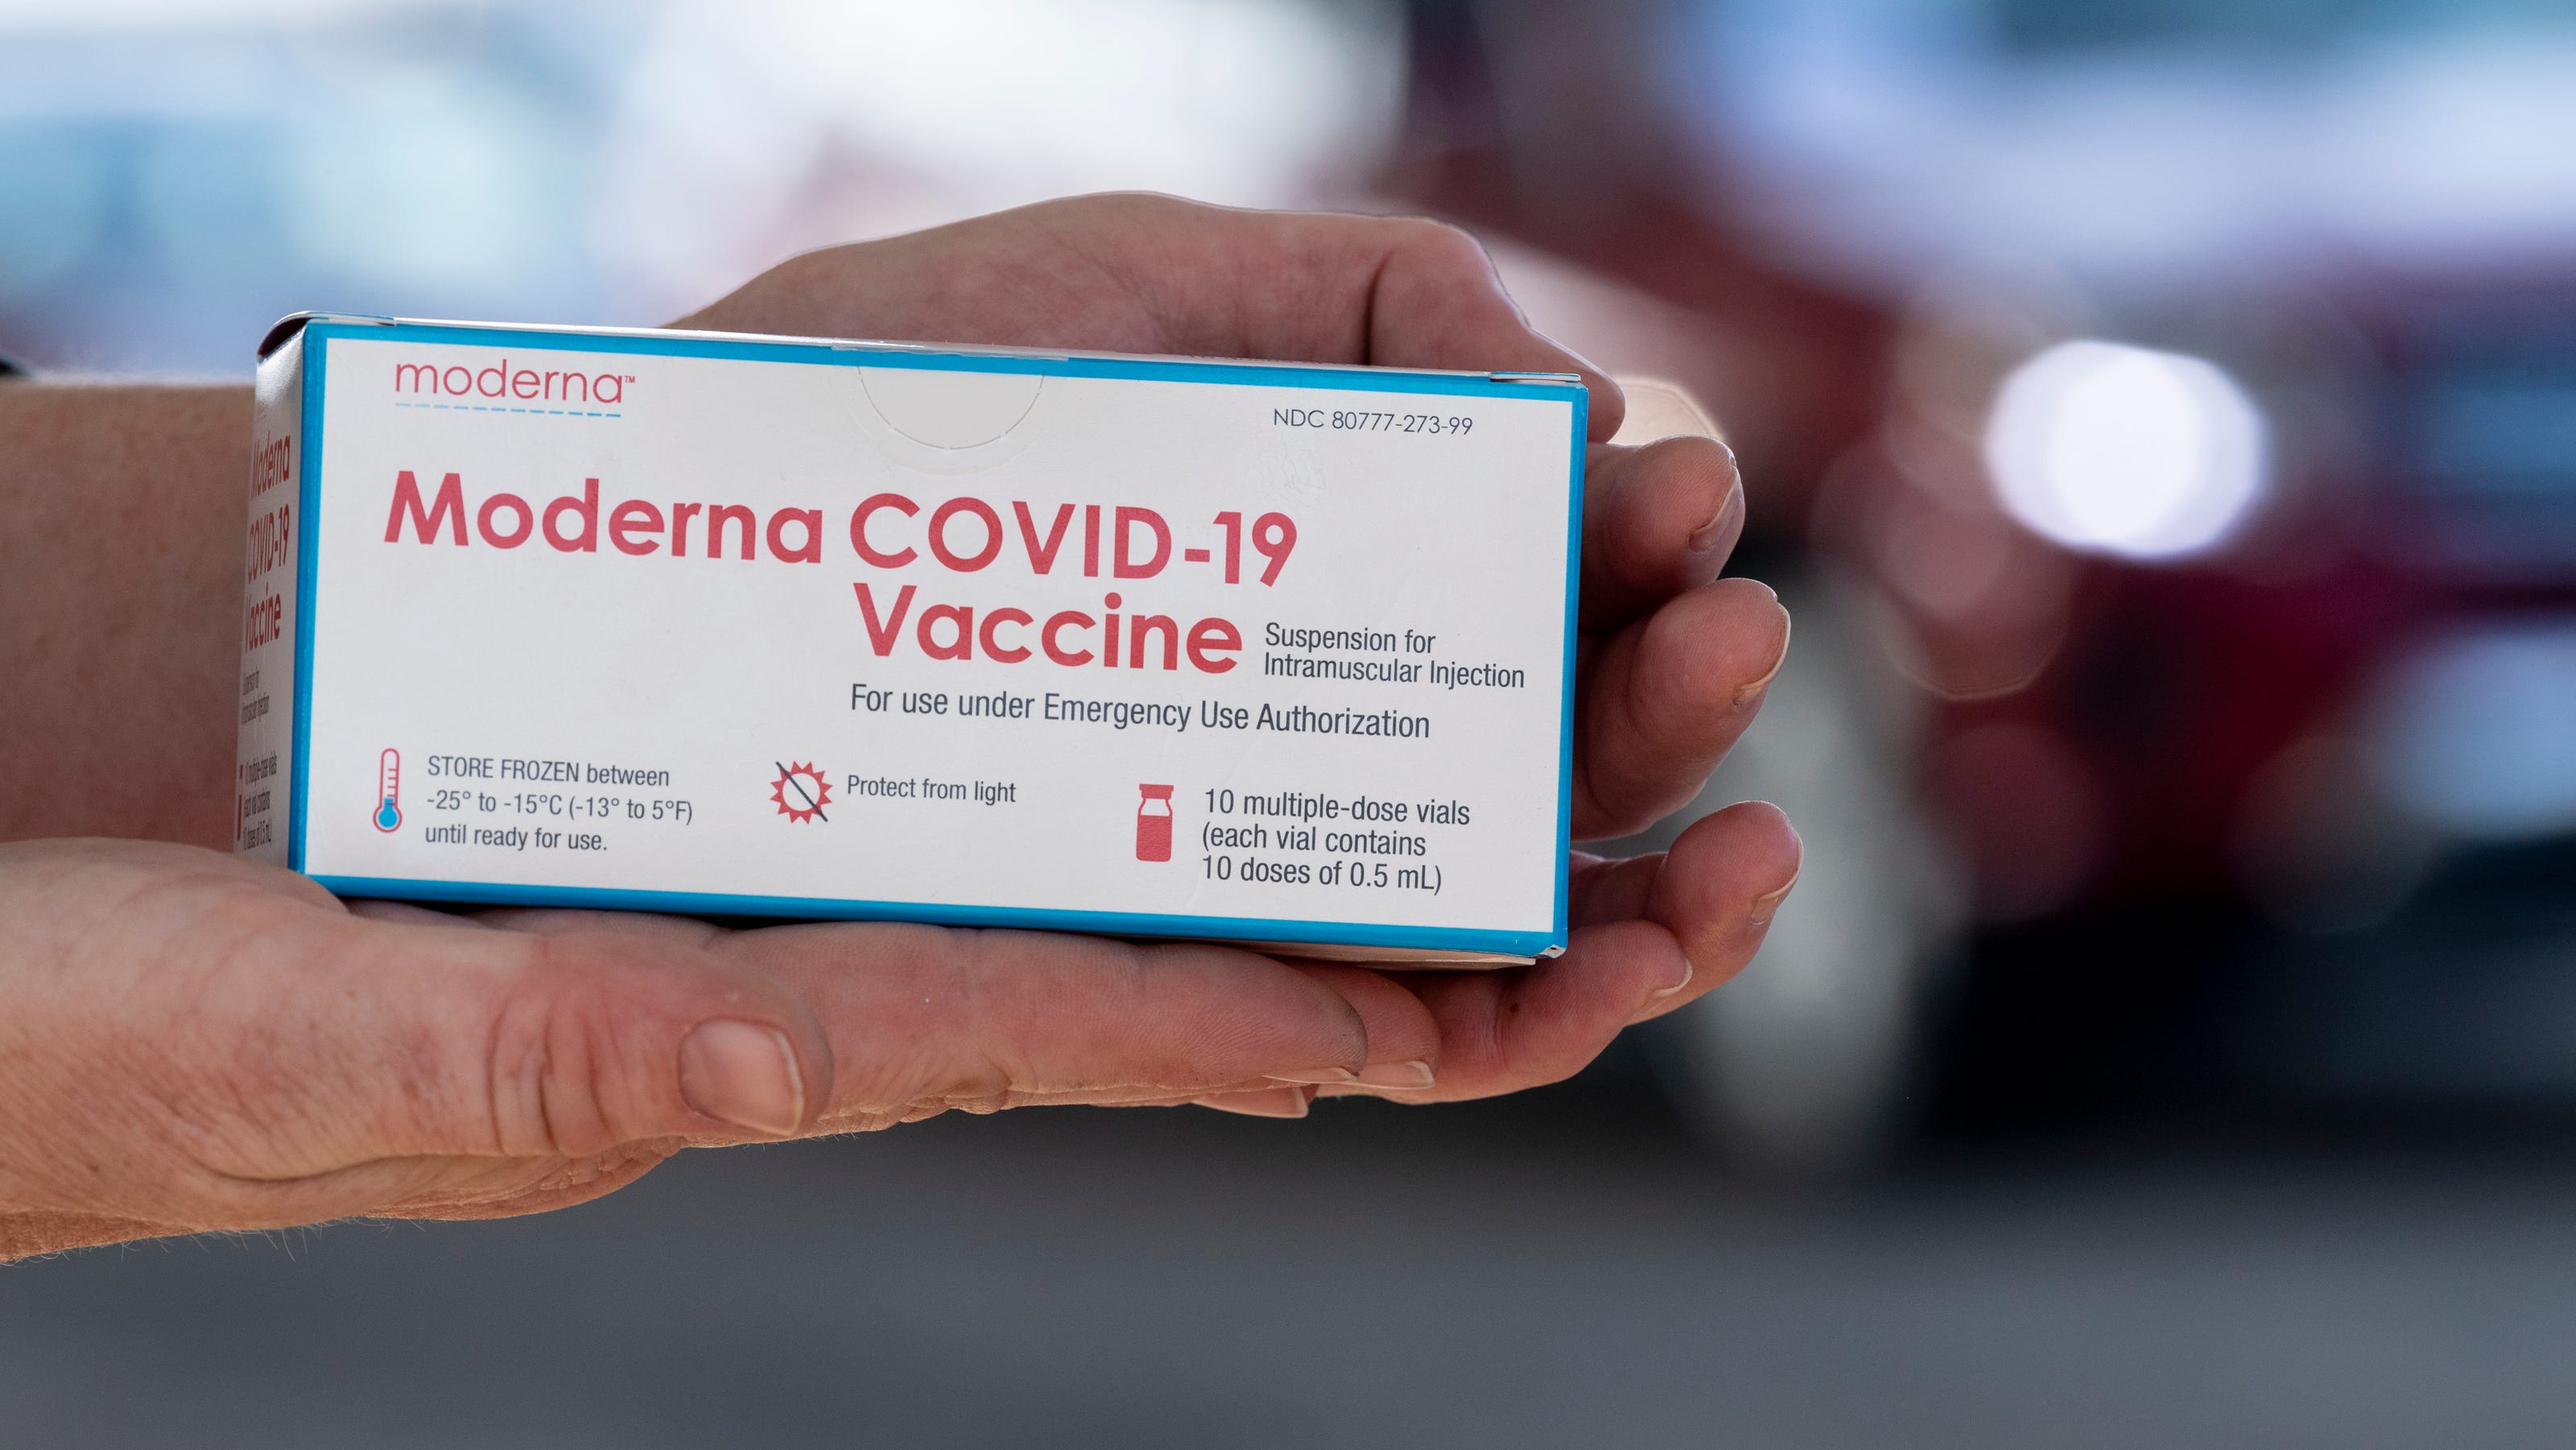 What to know if you received a dose of the affected Moderna vaccine